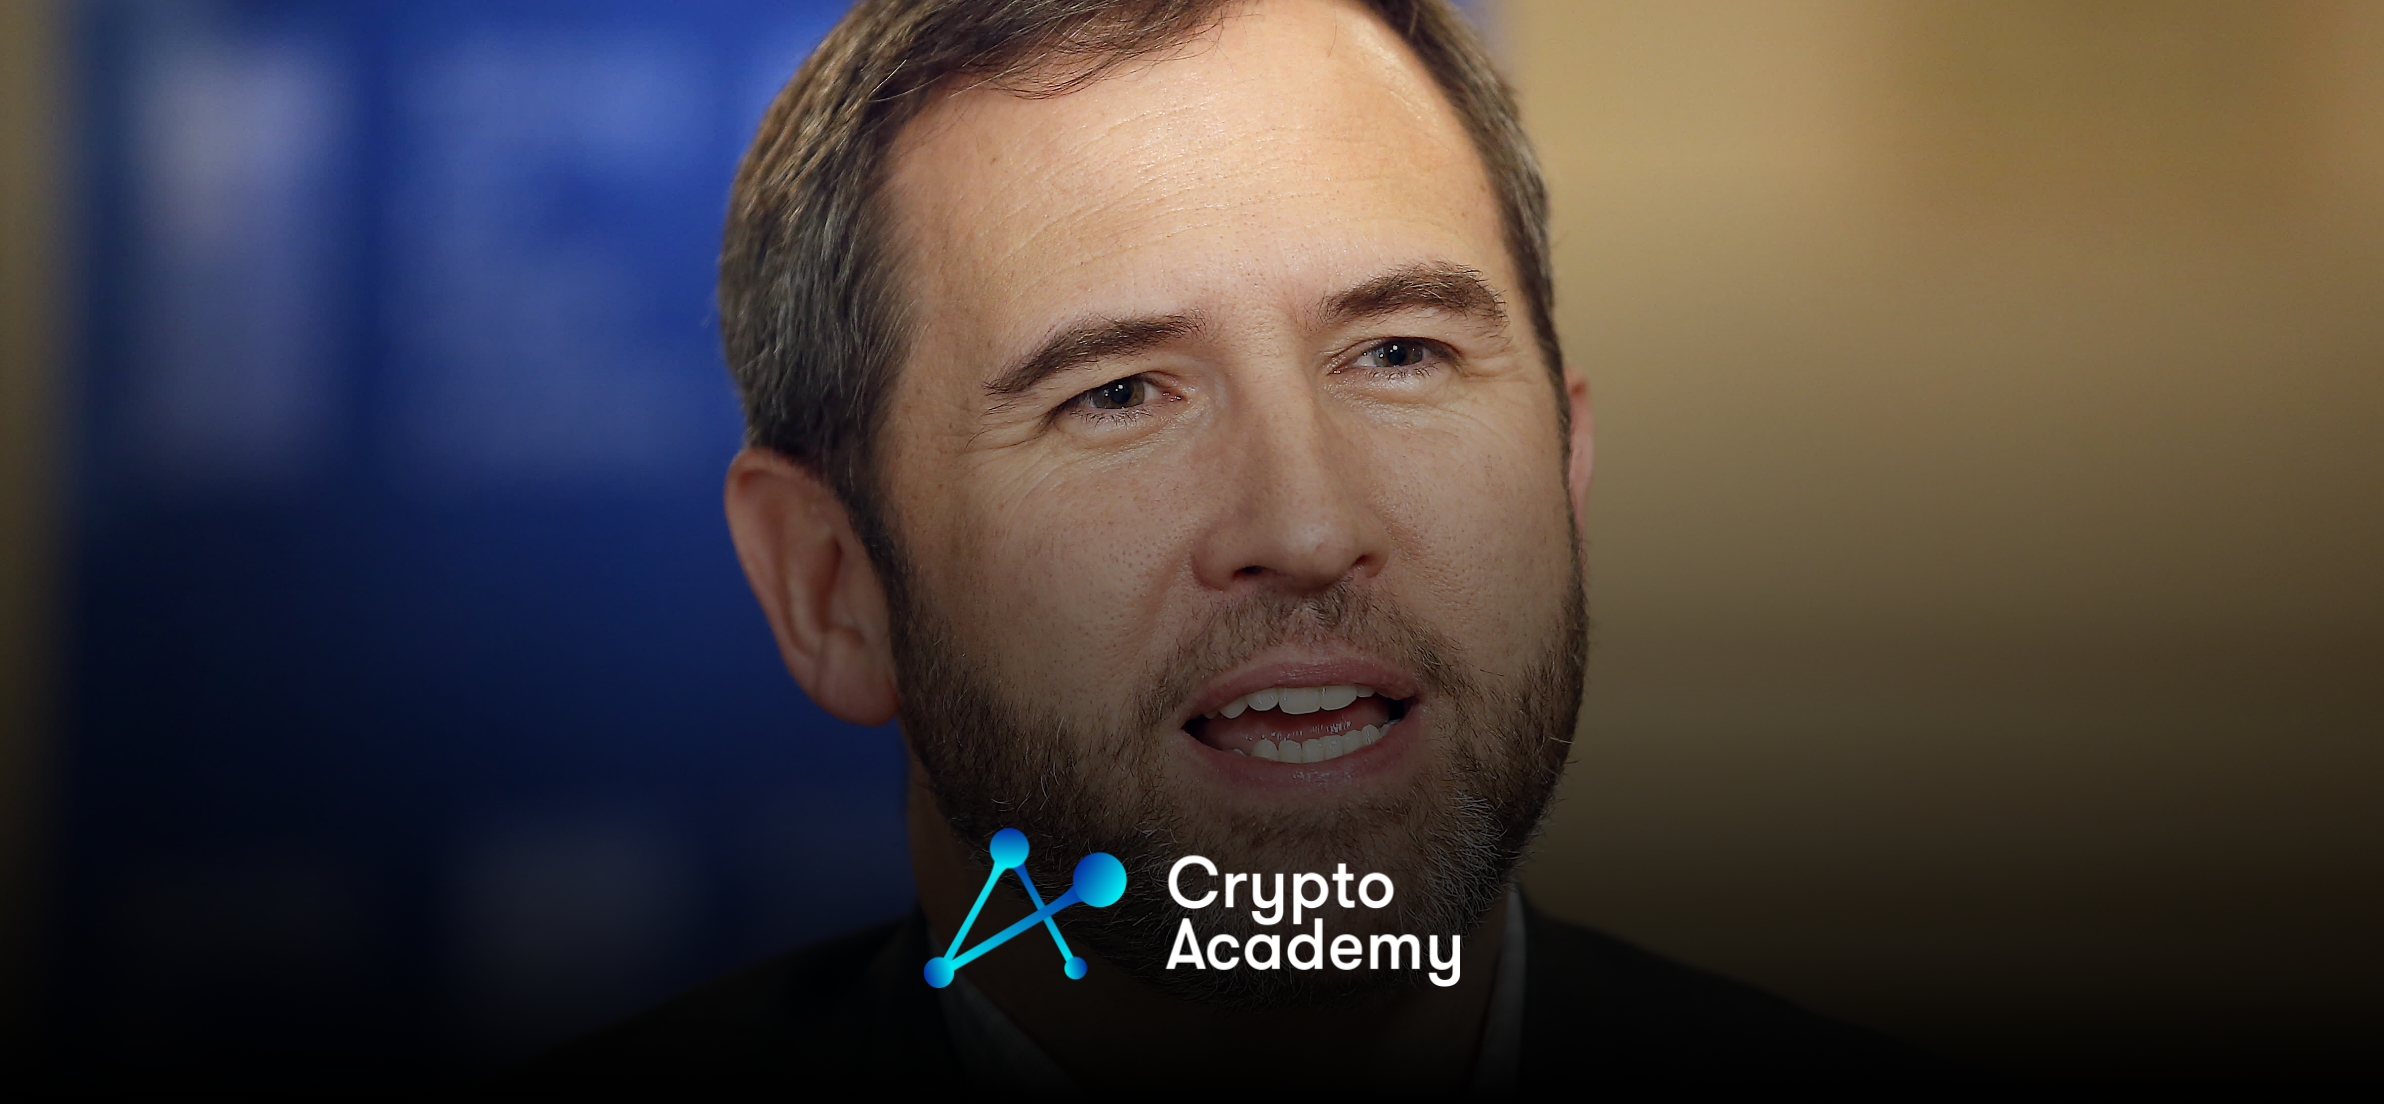 Ripple CEO Advises Against US for Crypto Startups